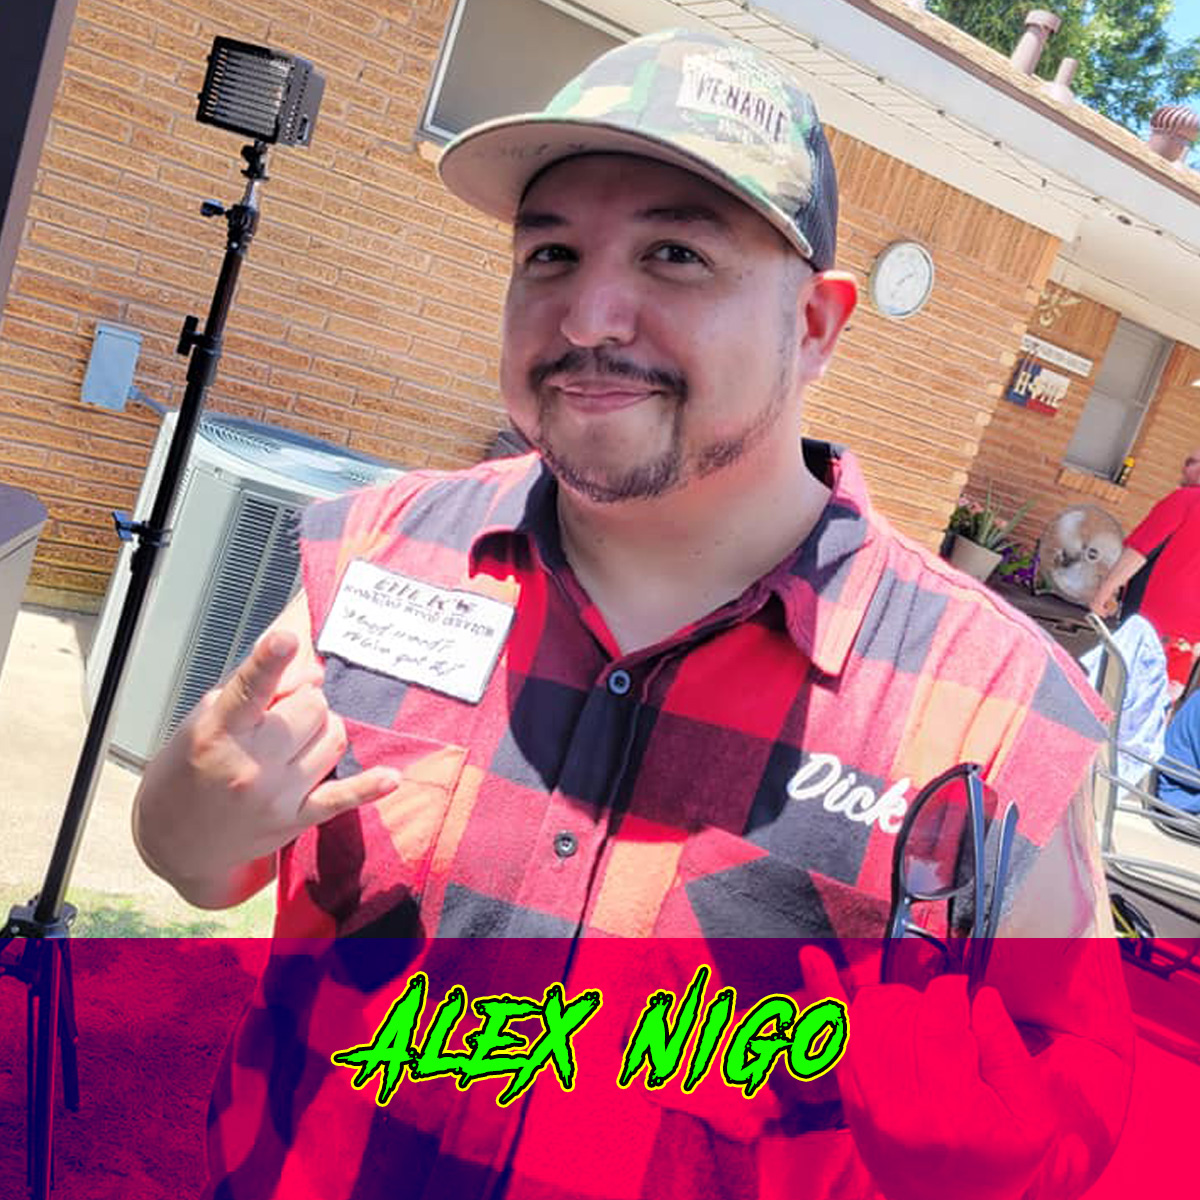 Cast Announcement #9! We're looking forward to working with Texas filmmaker/actor Alex Nigo.

Alex Nigo was born and raised in Dallas, Texas, where he developed a passion for Tejano music and horror films.

#Indiefilm #SupportIndieFilm #LatinoFilm